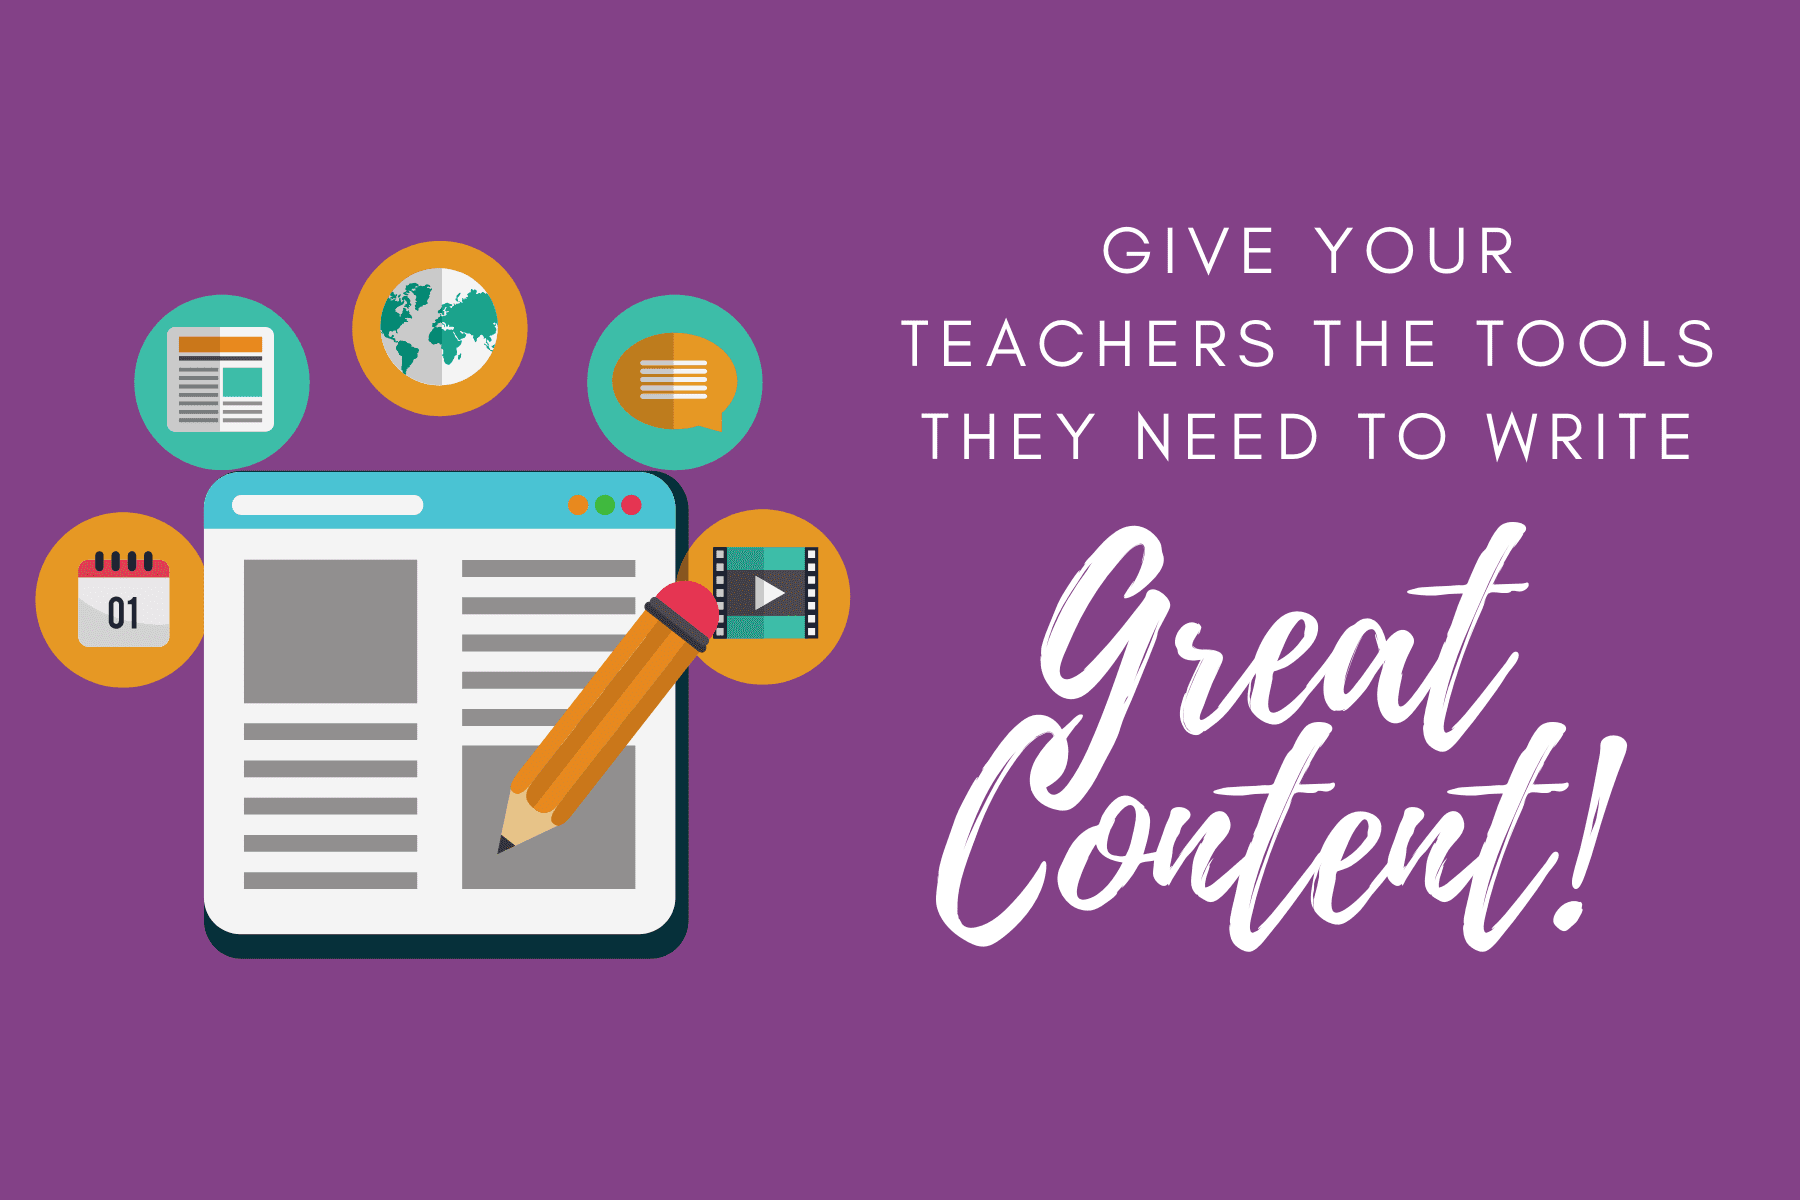 Give teachers the tools they need to write great content